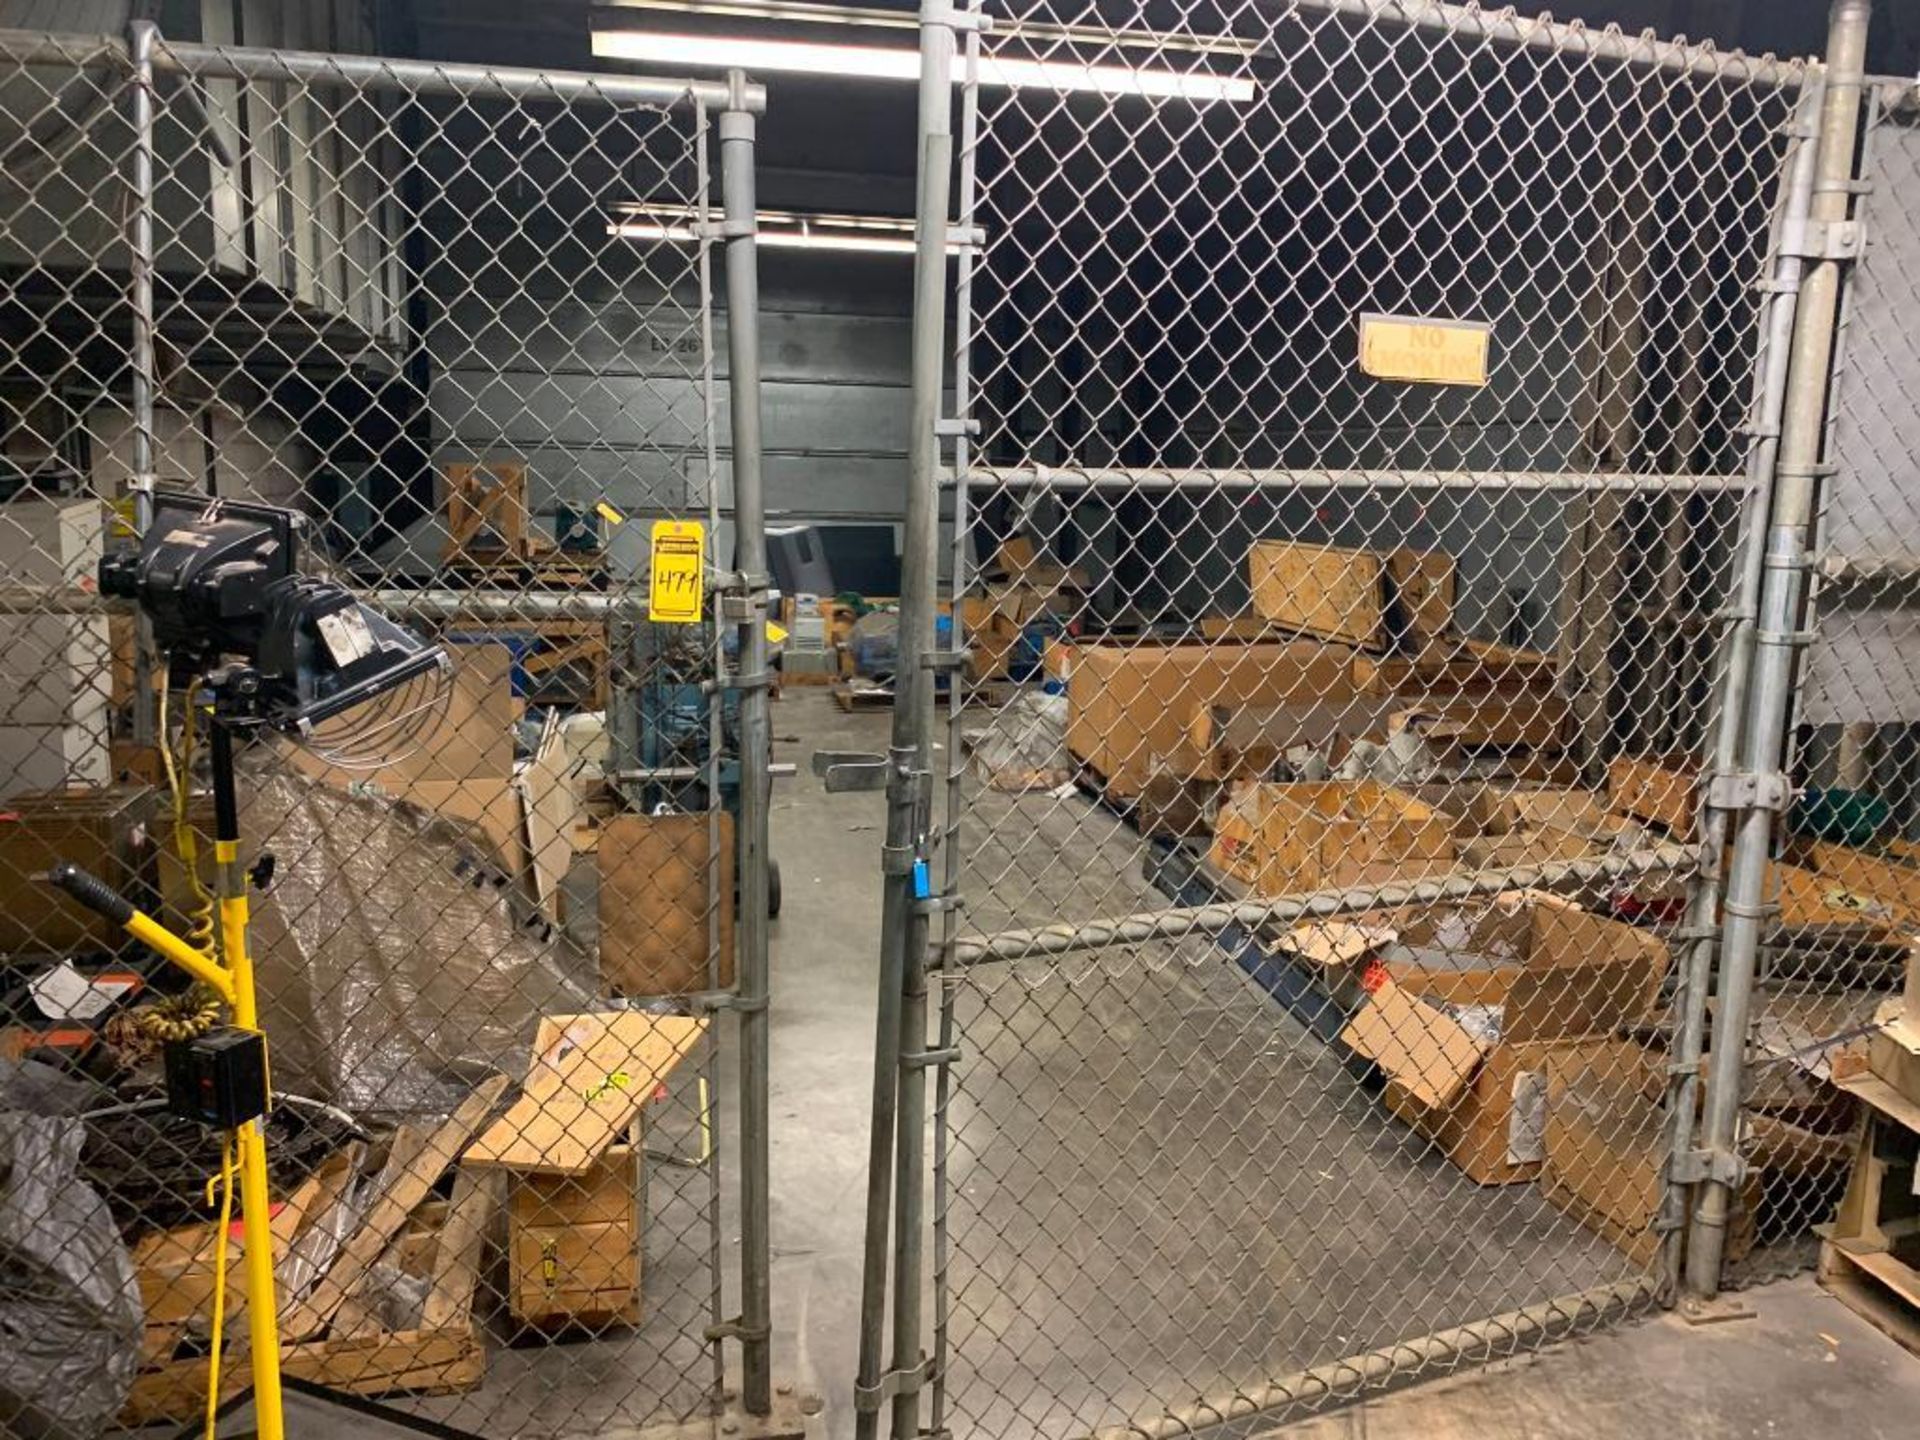 Items in Caged Area; Unitek Cutting Machine, Model 325-9H, 440 V, S/N 21787, Assorted Electric Motor